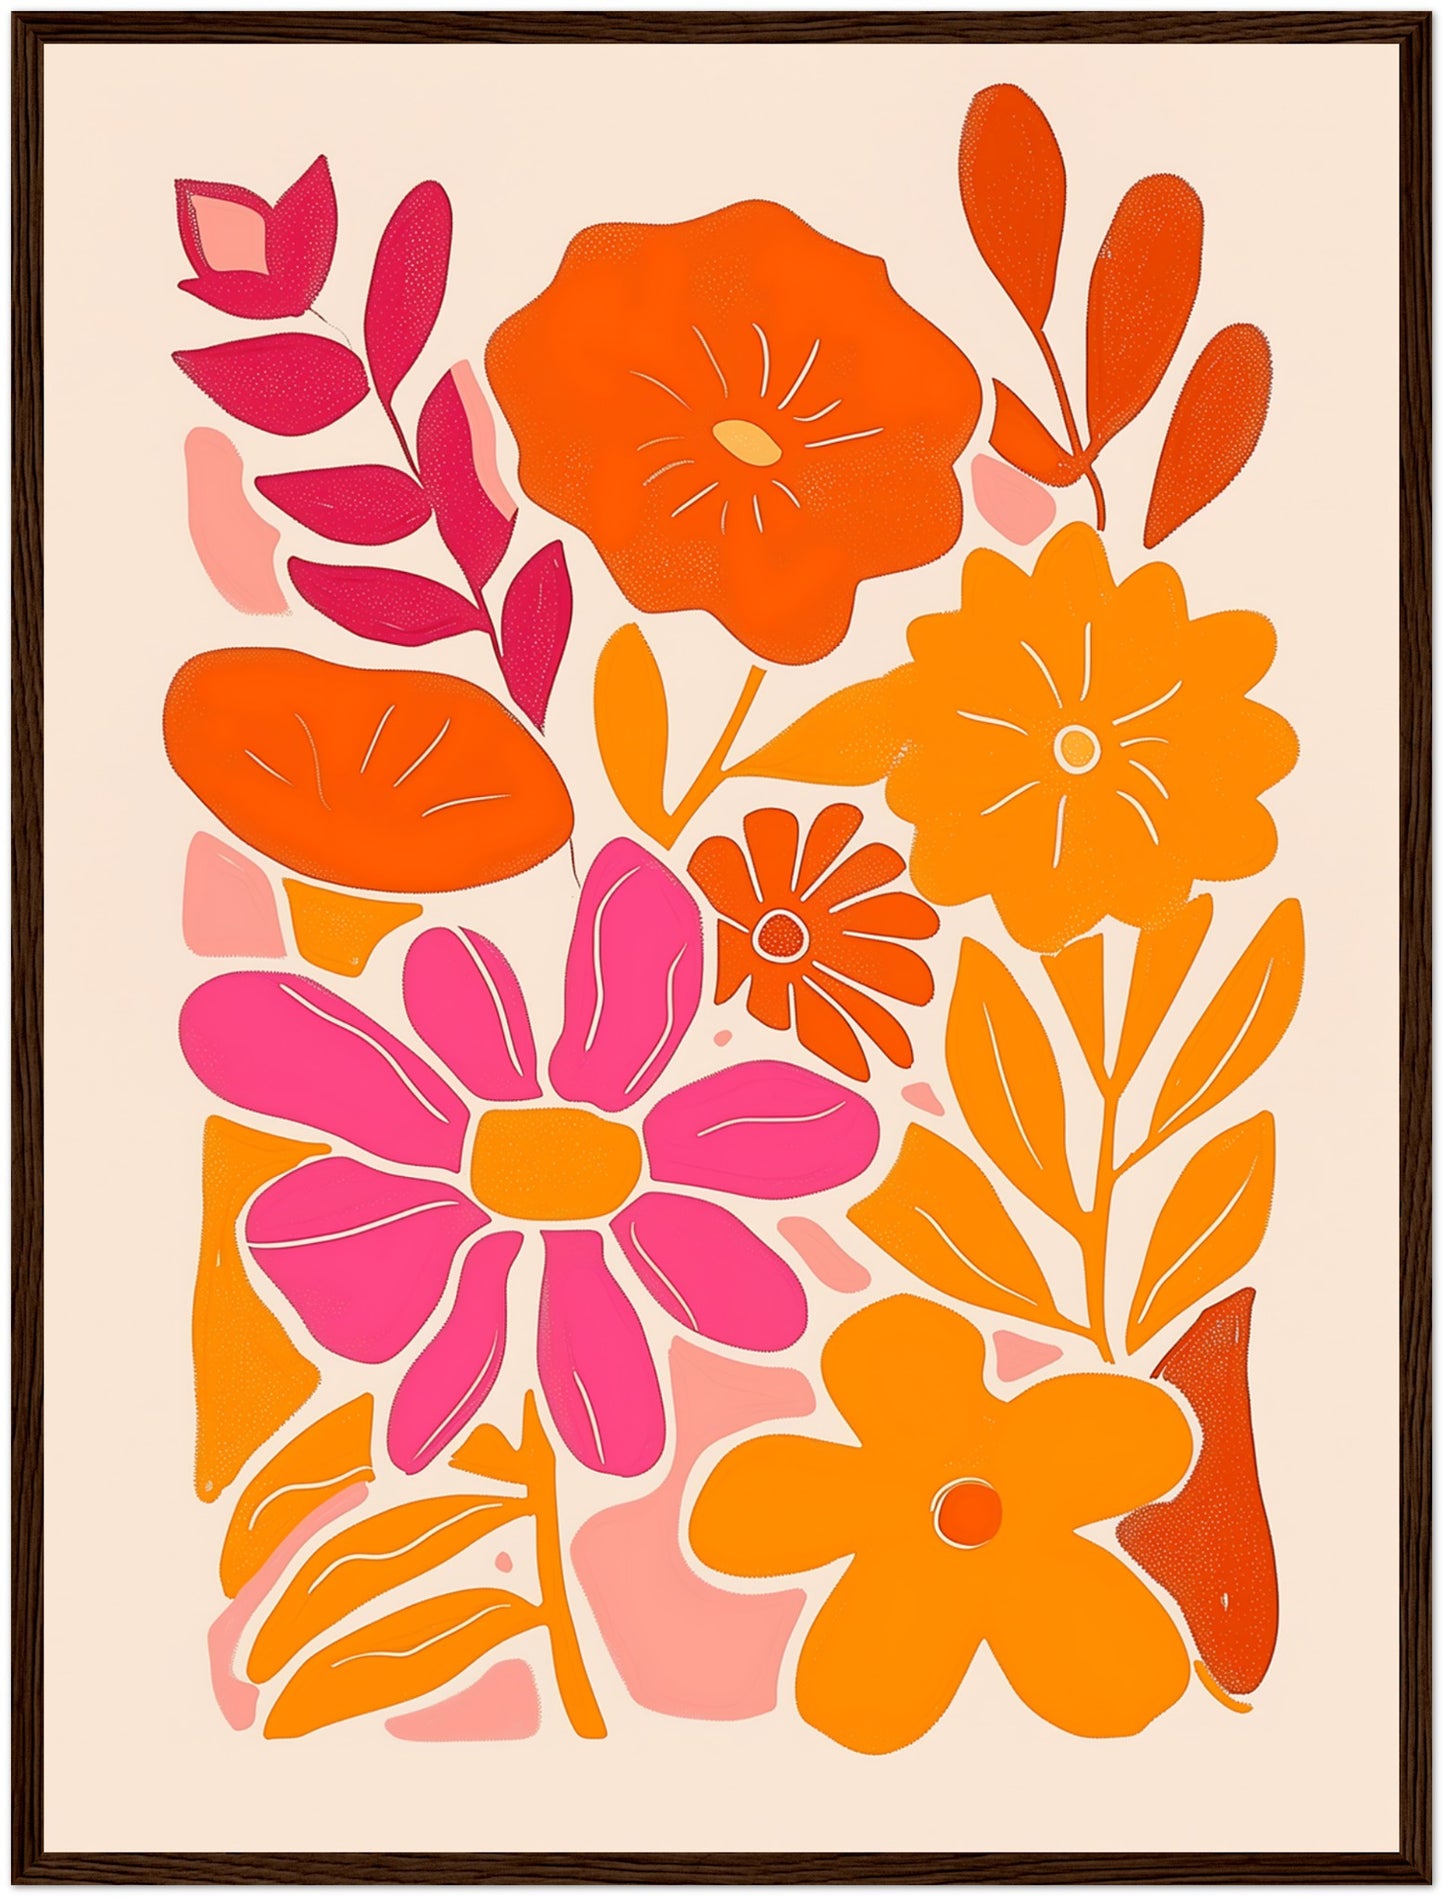 Colorful abstract floral artwork in a frame.